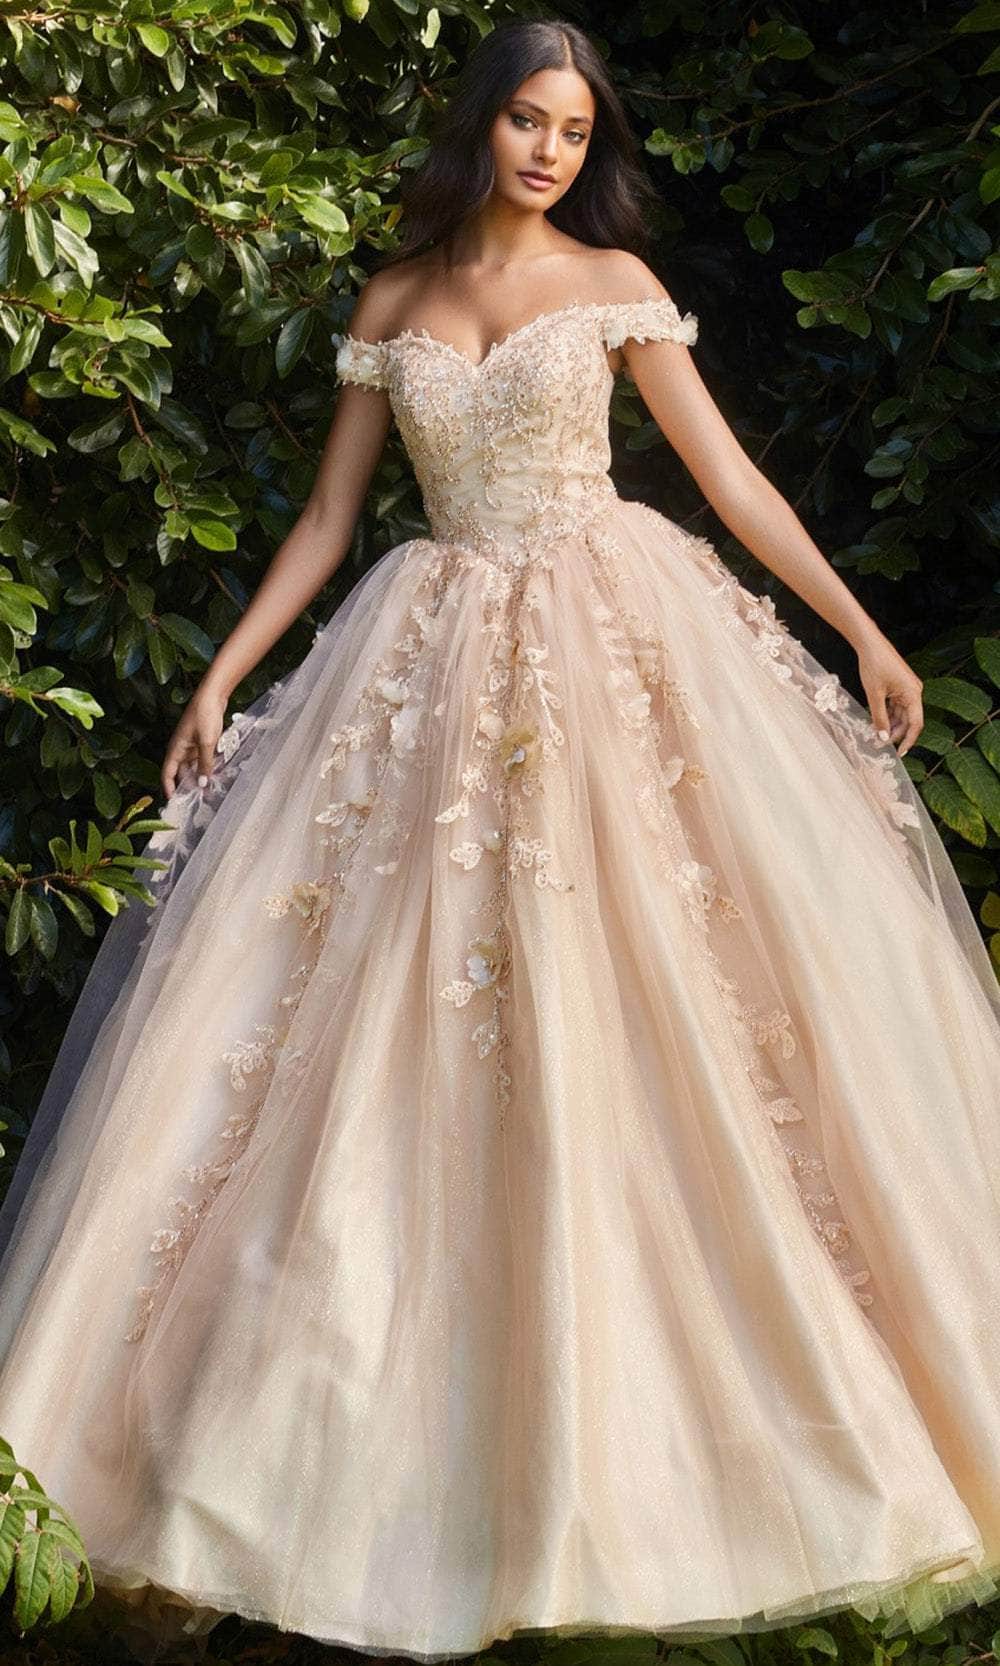 Ladivine CD0185 - Off Shoulder Layered Tulle Ballgown
